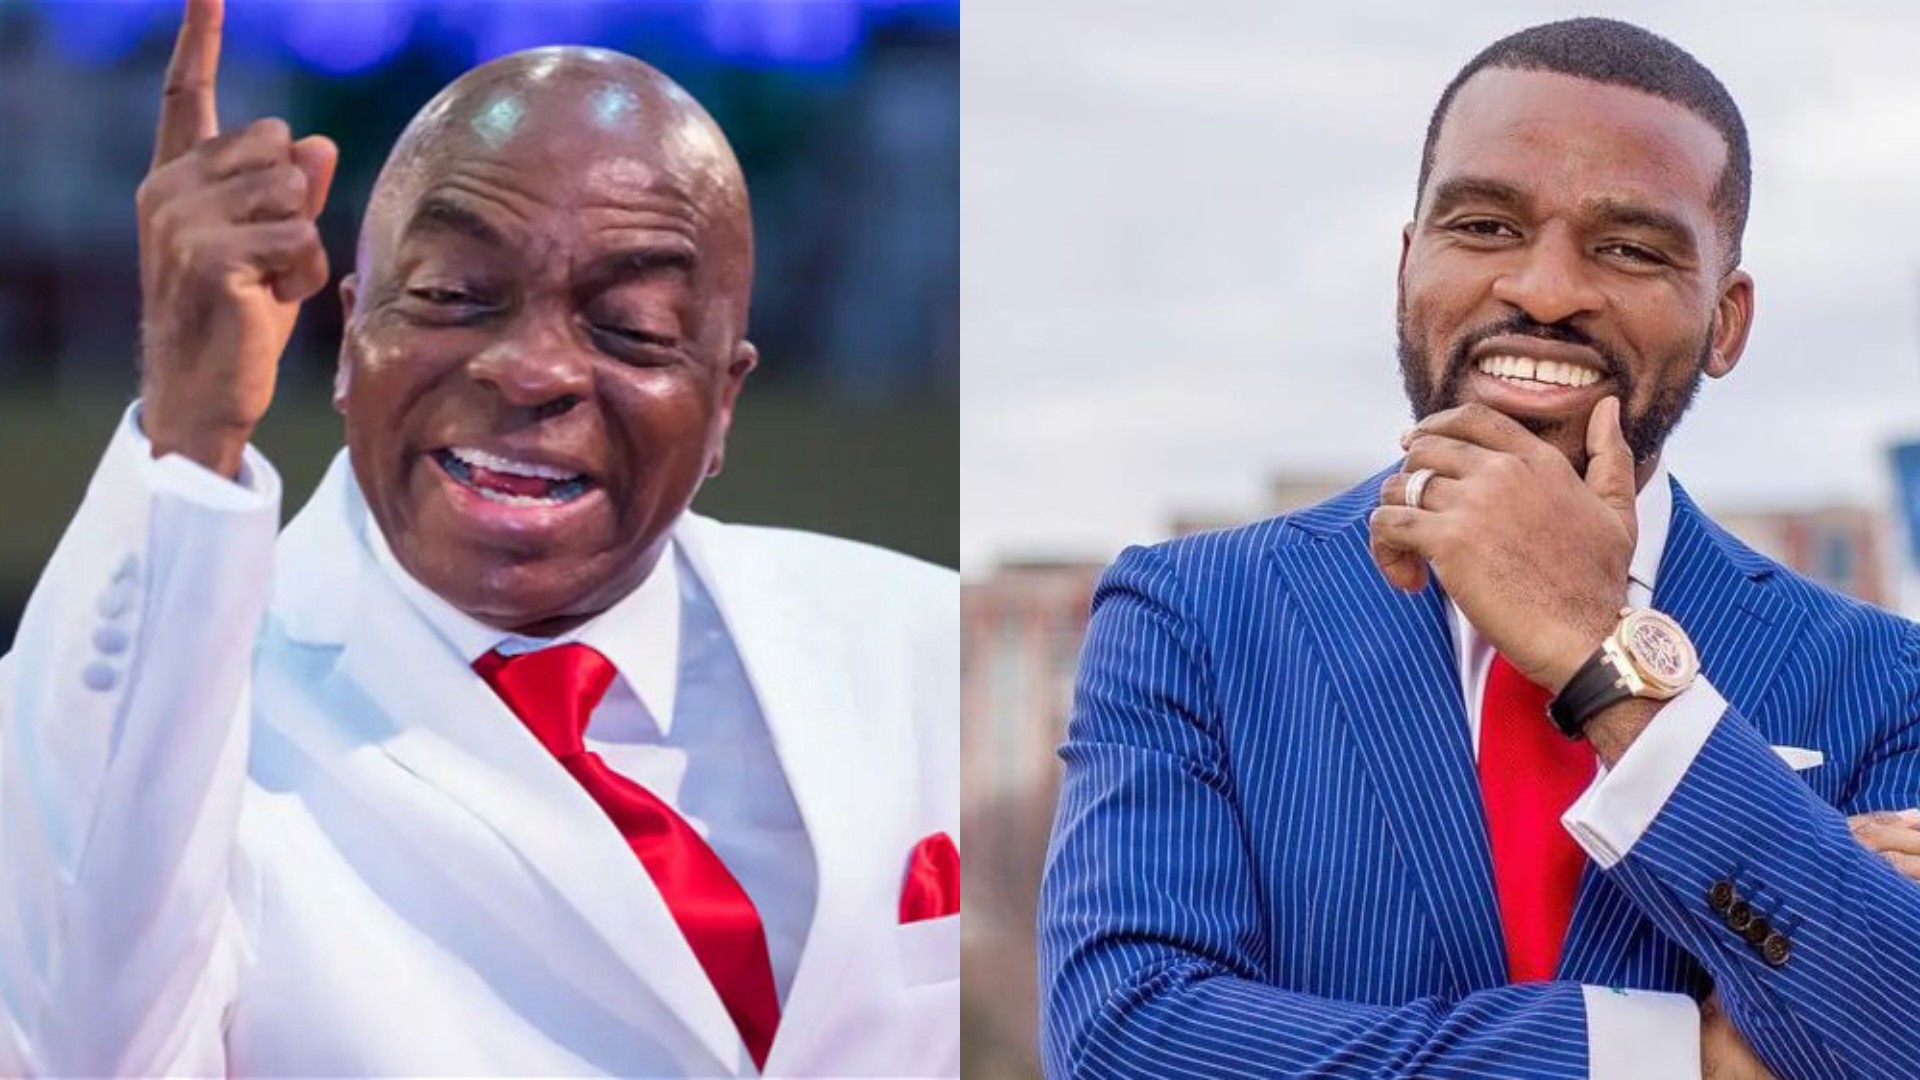 Isaac Oyedepo speaks on resigning from father’s church to start his own ministry